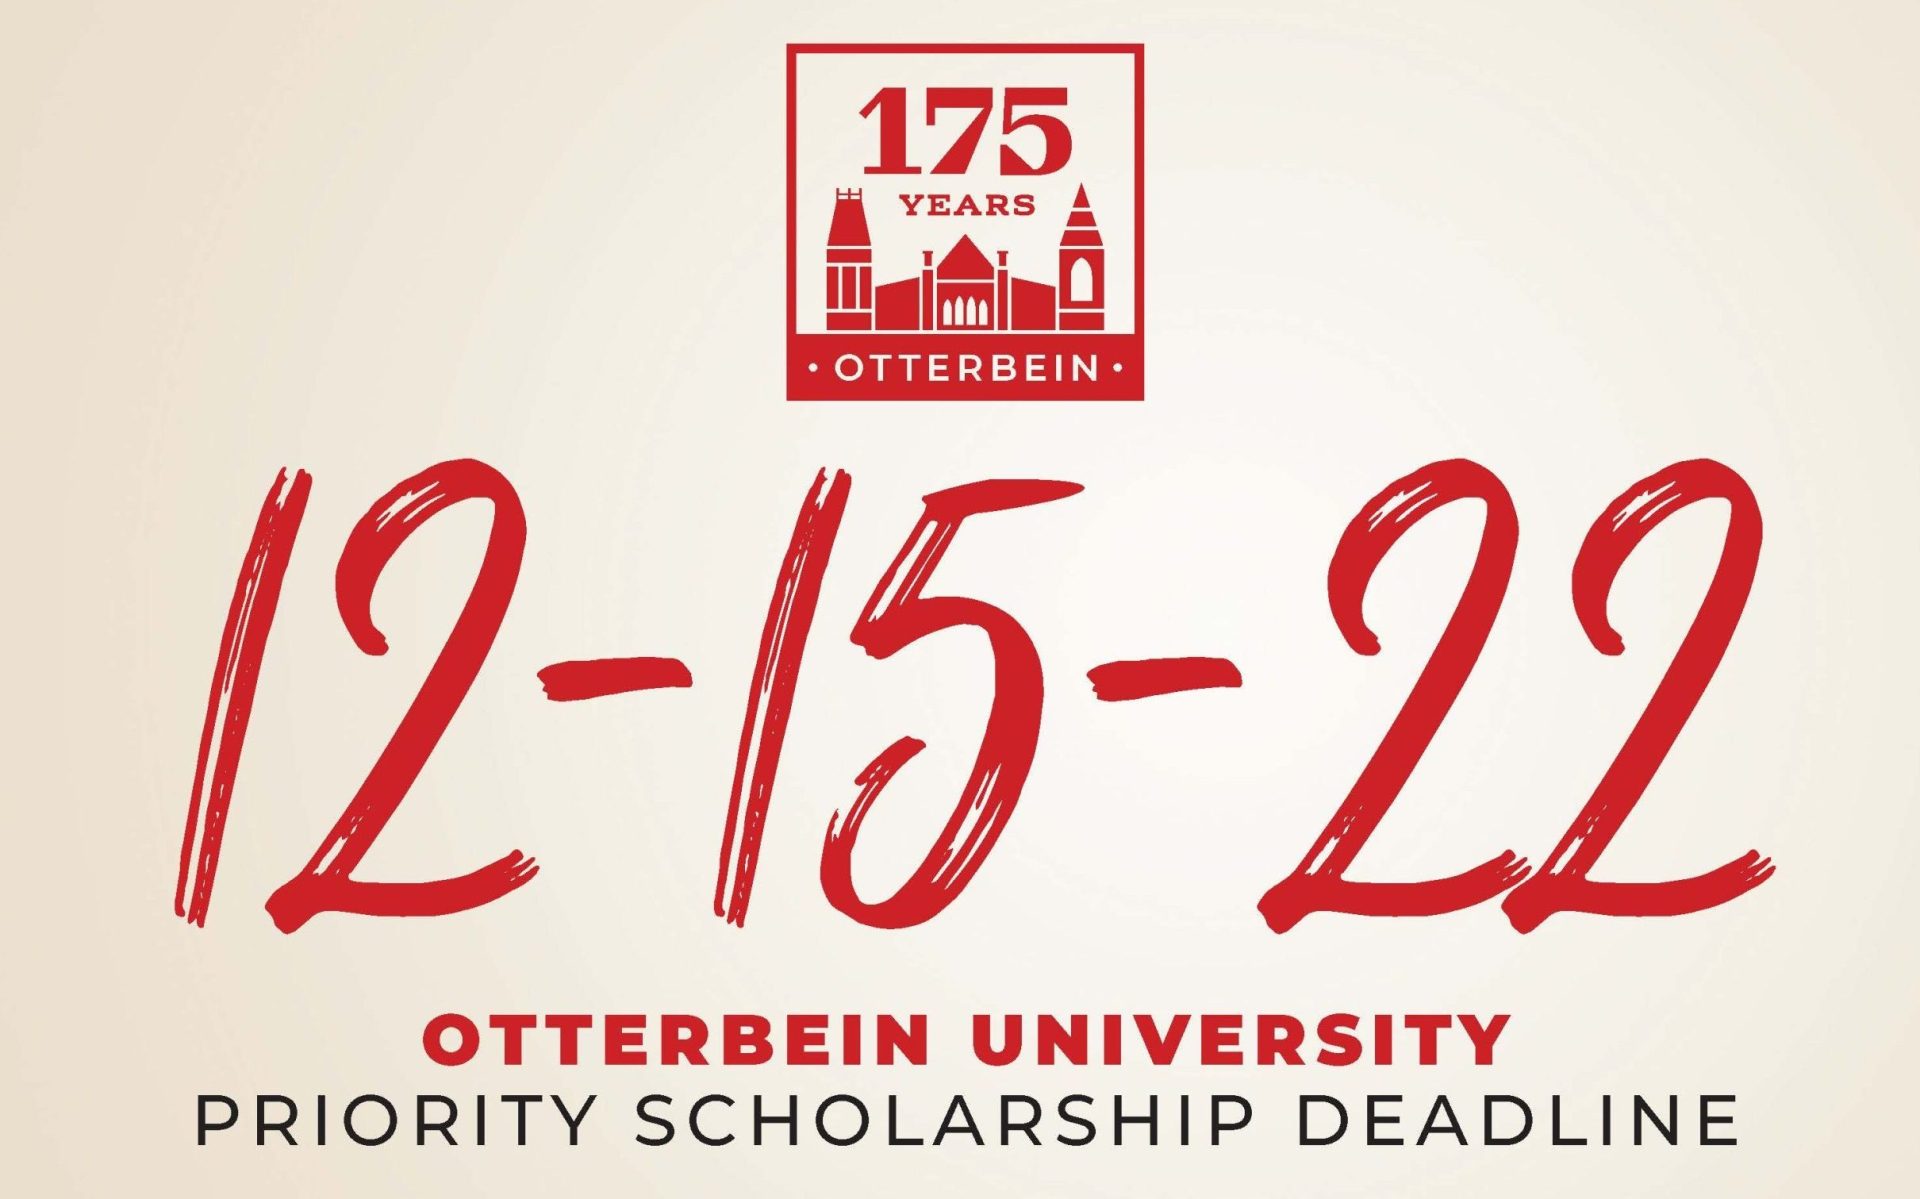 12-15-22 is our Priority Scholarship Deadline